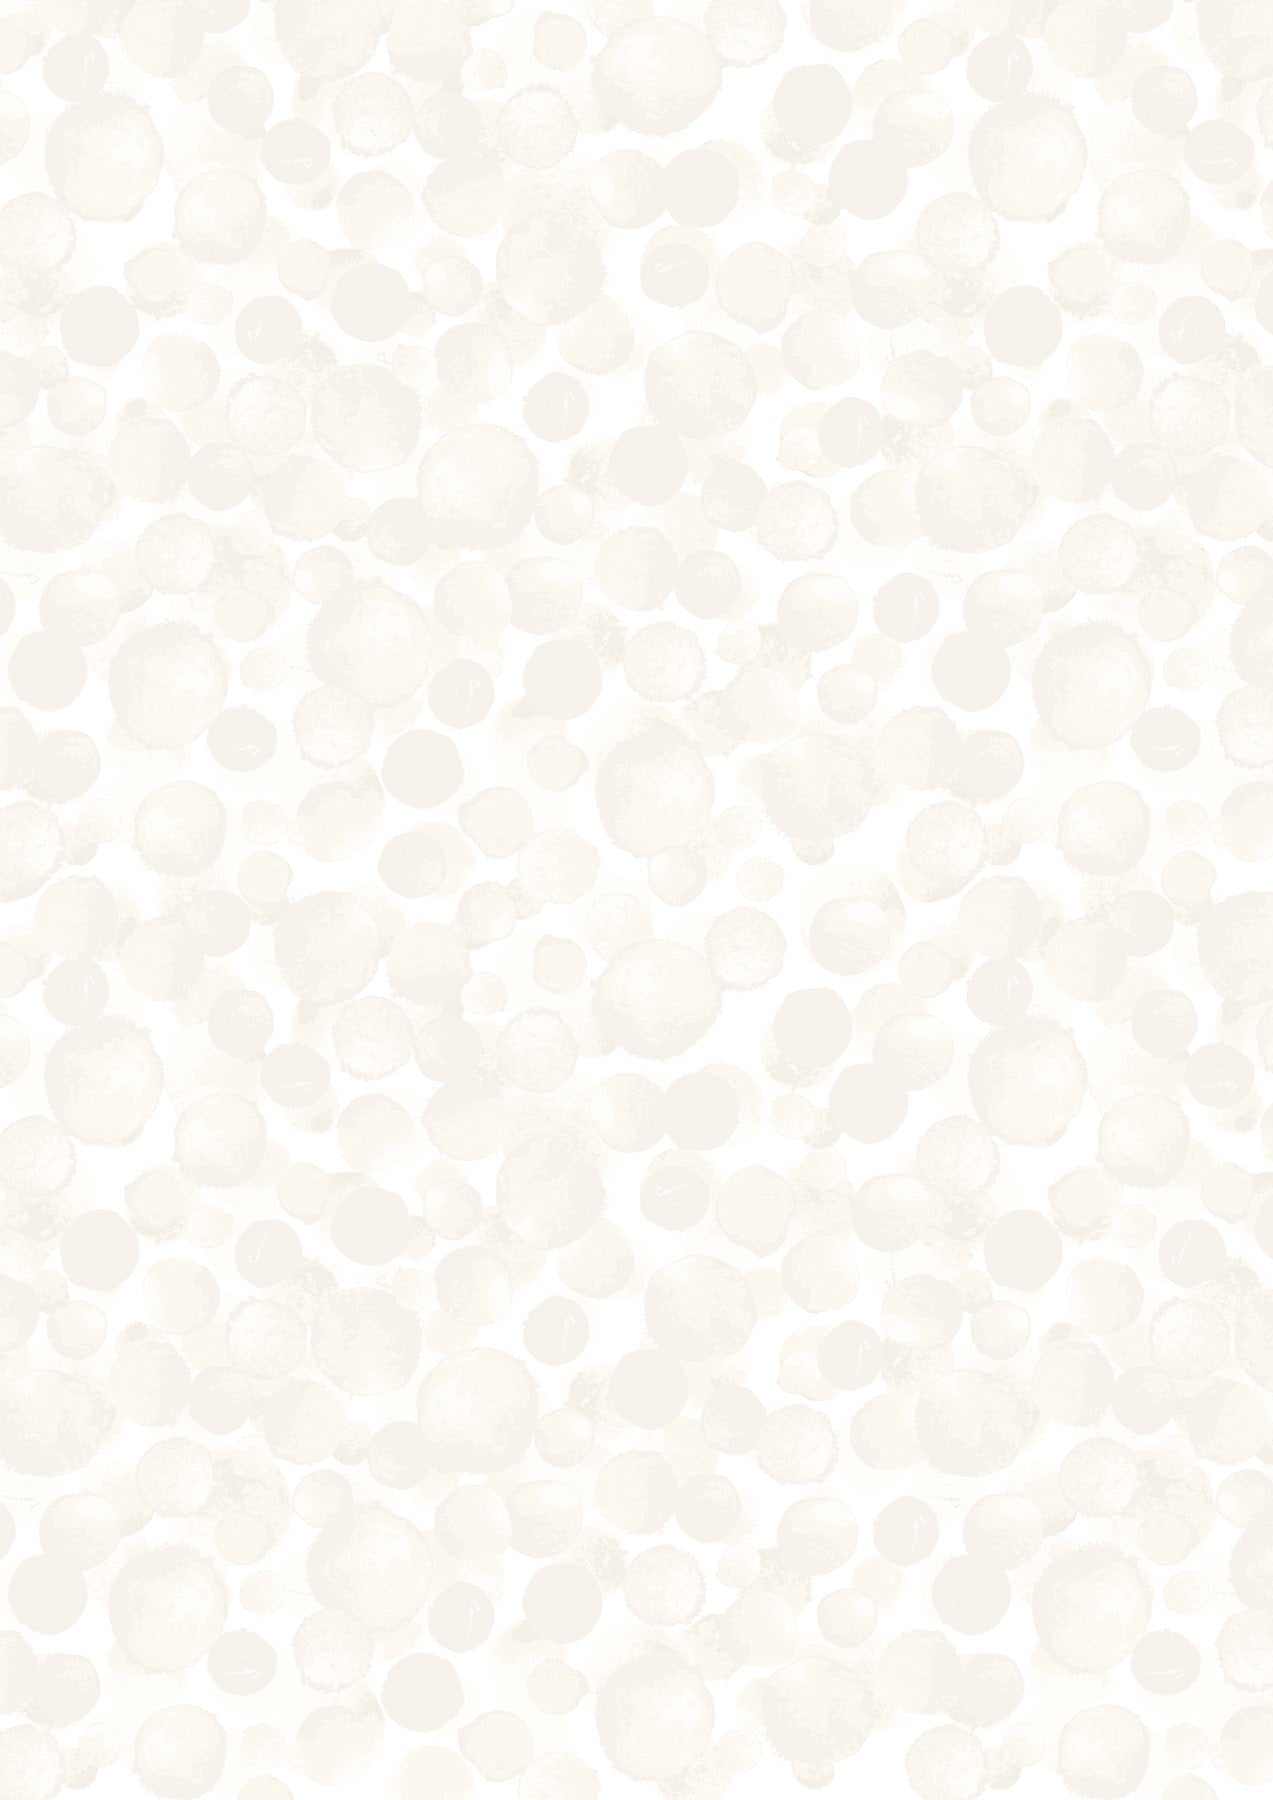 Bumbleberries - White (BB01) by Lewis & Irene - Cotton Blender